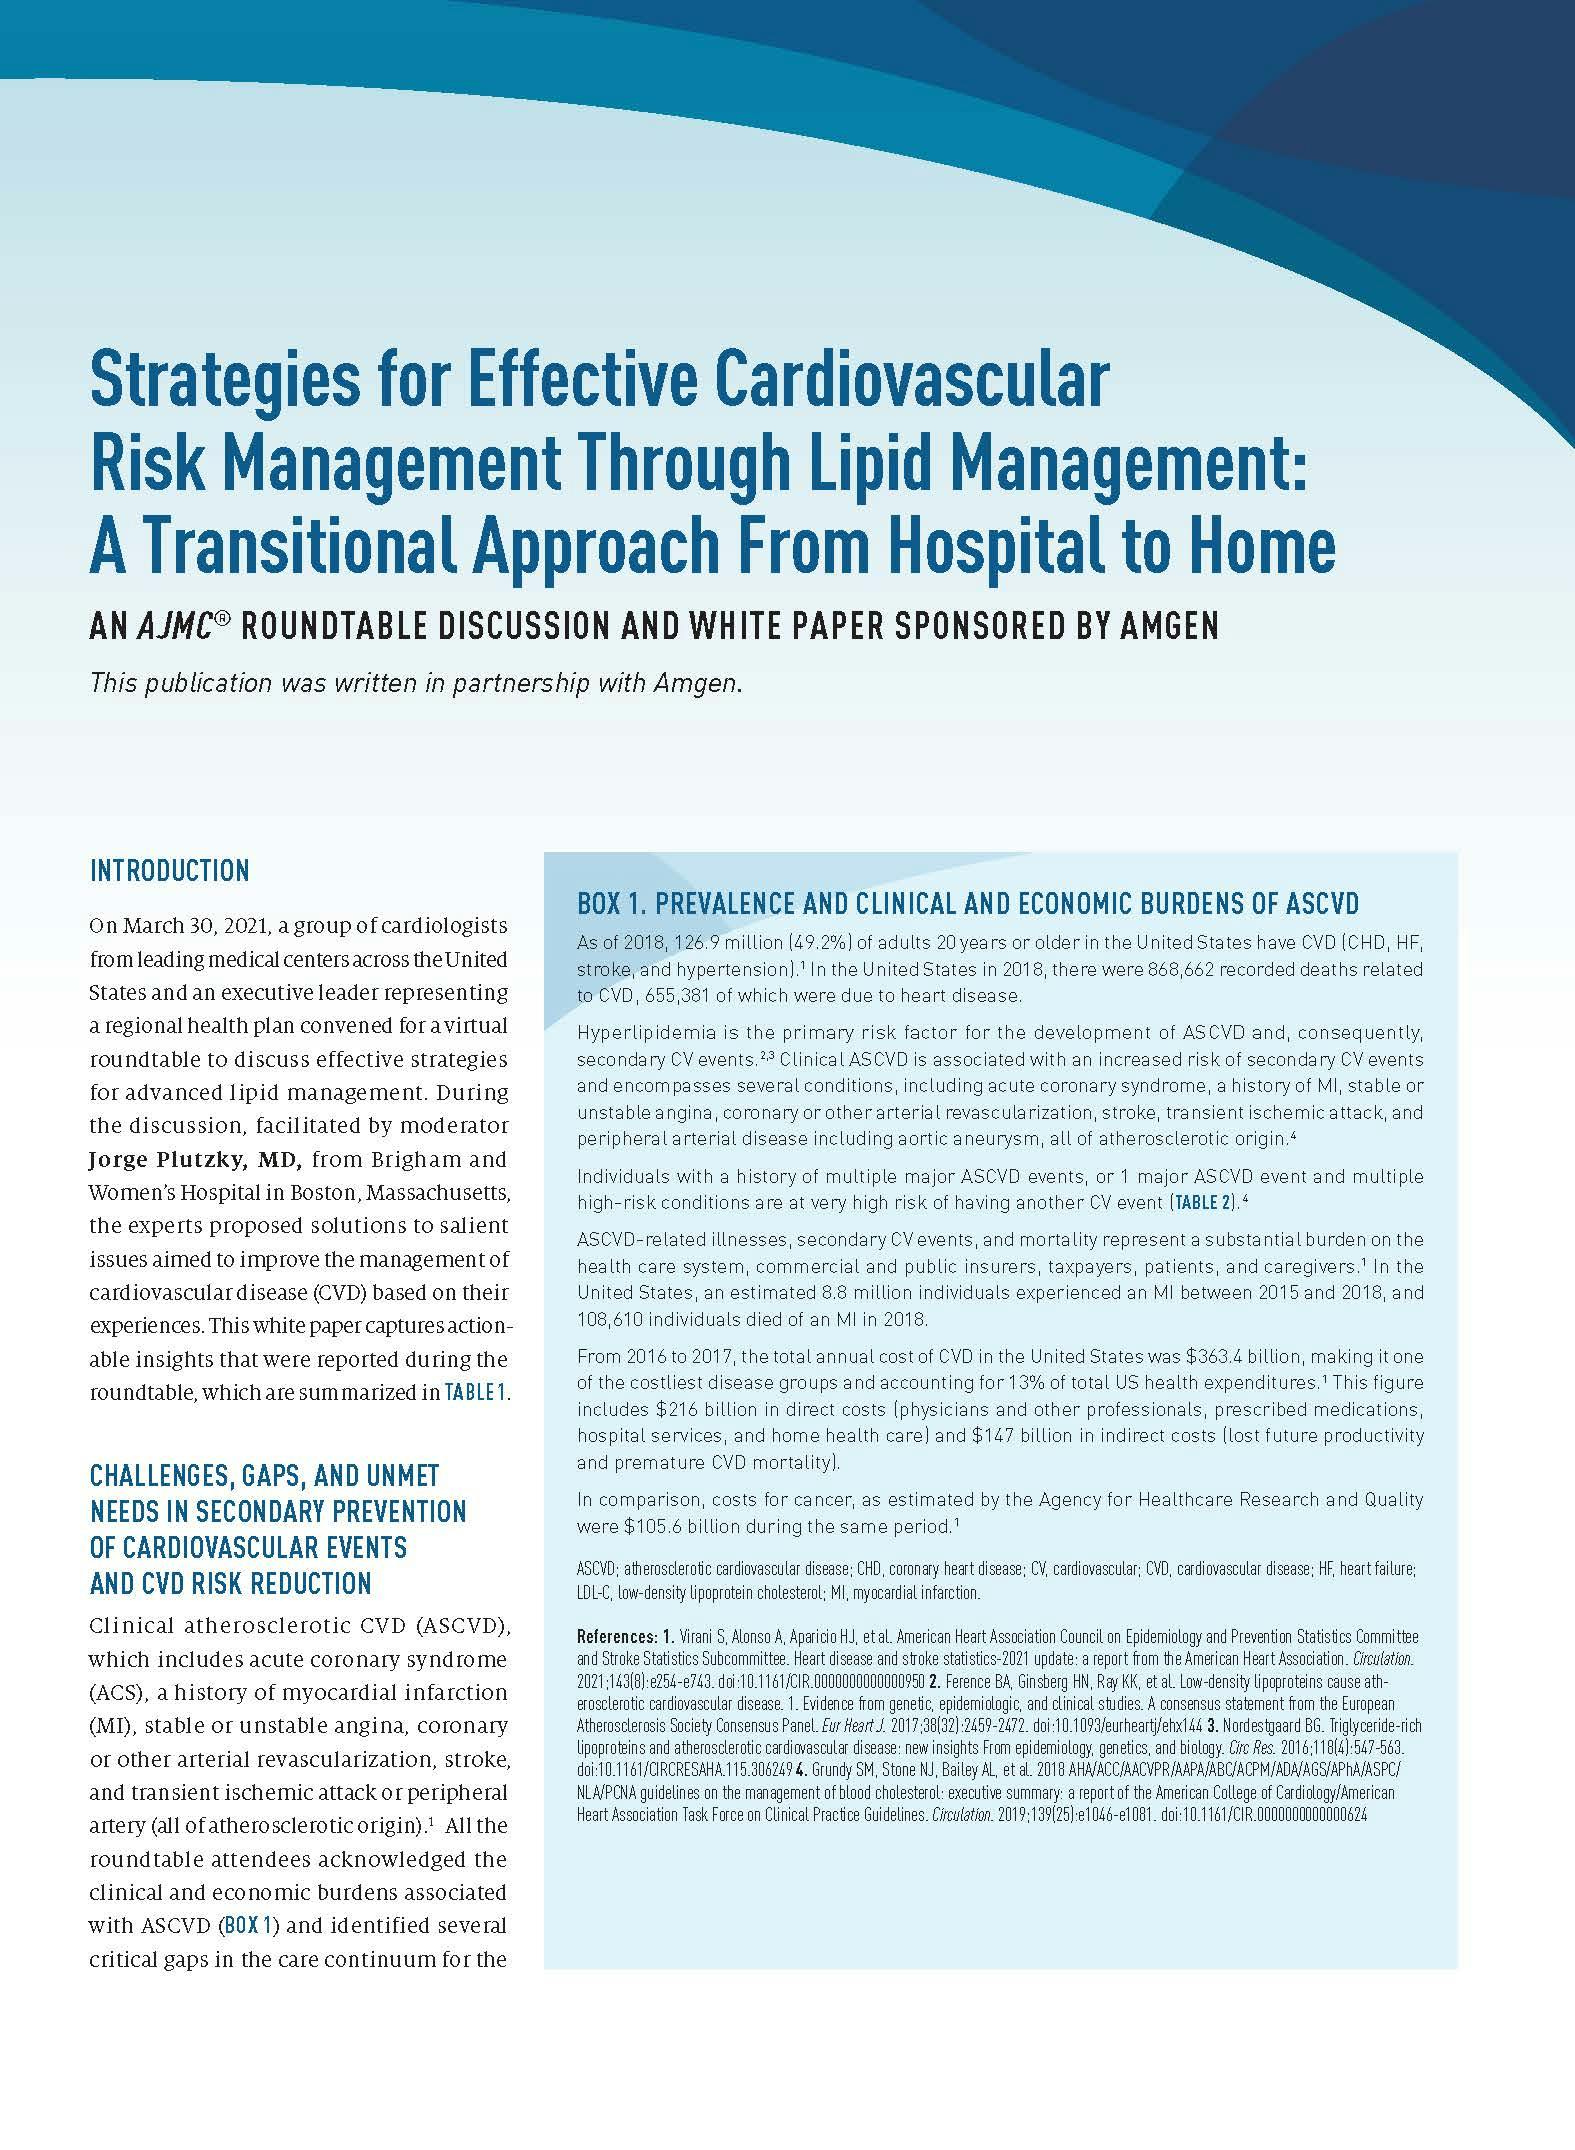 Strategies for Effective Cardiovascular Risk Management Through Lipid Management: A Transitional Approach From Hospital to Home